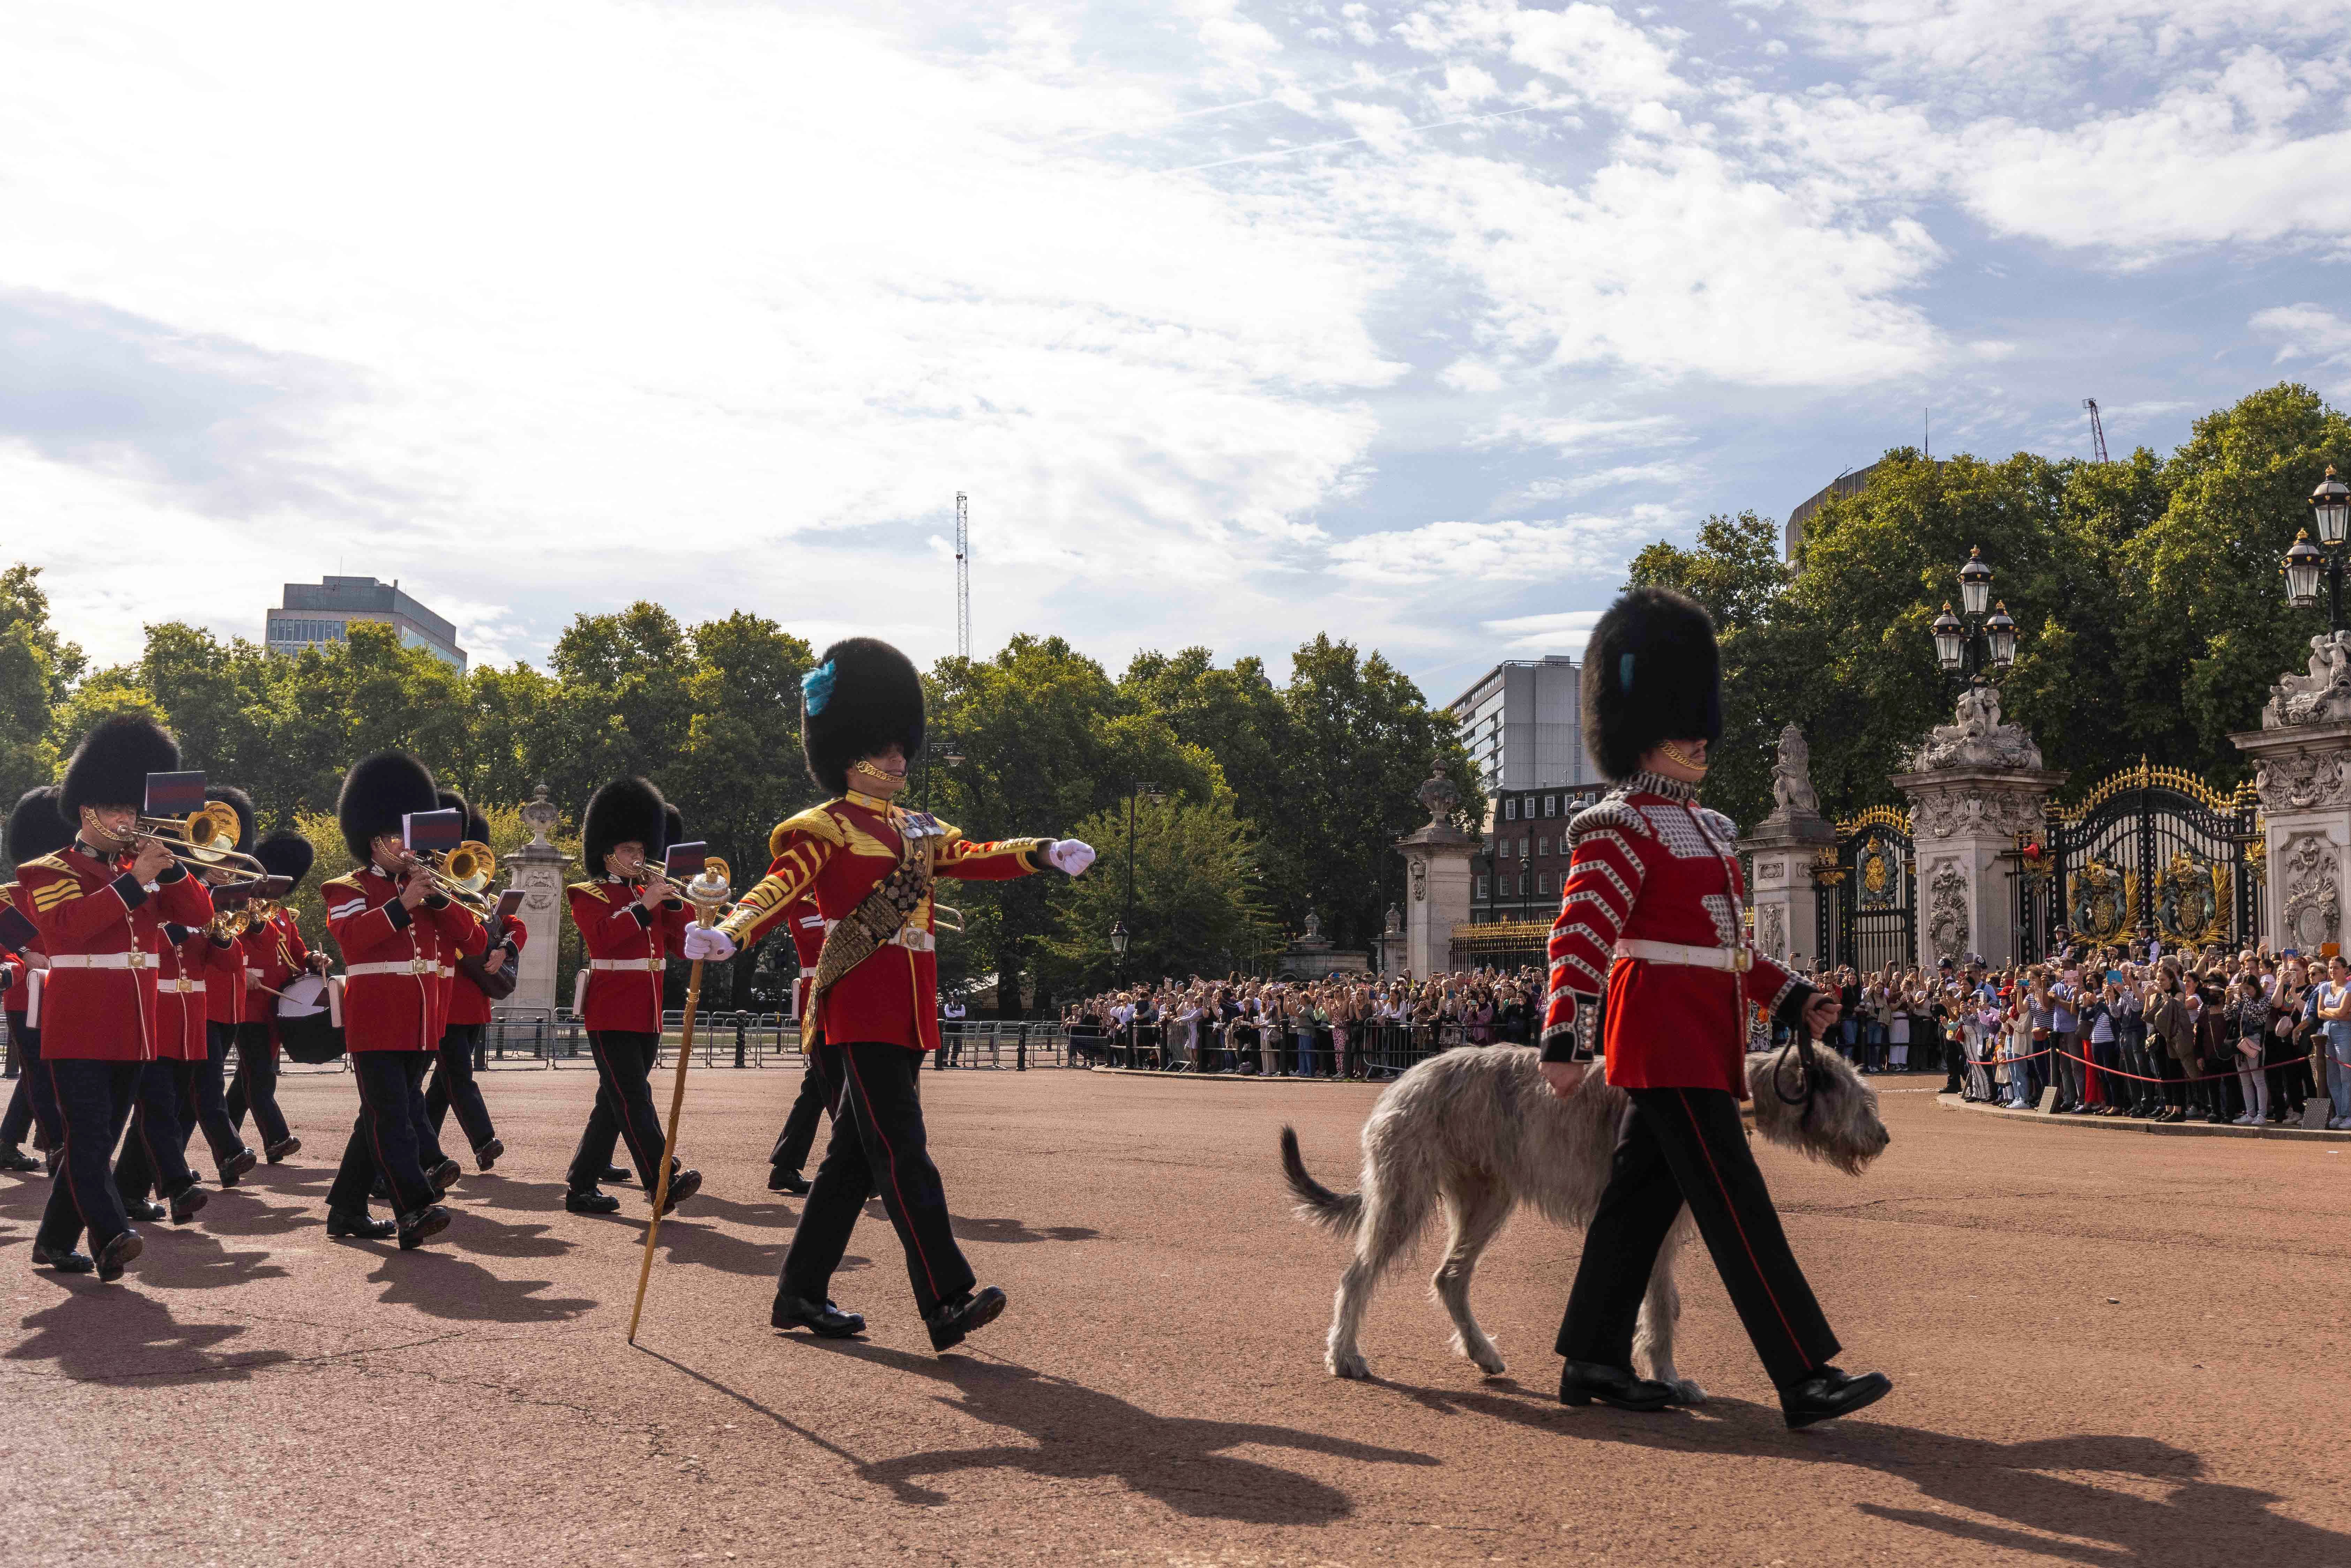 Today (12 September 2022)The Irish Guards performed the first Kings Guard at Buckingham Palace in 70 years. The Parade was led by the Band of the Irish Guards and took over from 7 Company Coldstream Guards.Changing the Guard is a formal ceremony in which the group of soldiers currently protecting Buckingham Palace are replaced by a new group of soldiers. Elite soldiers have guarded the King or Queen since the reign of Henry VII who made the Royal Body Guard a permanent institution which has spanned over 520 years of history. (Mod)